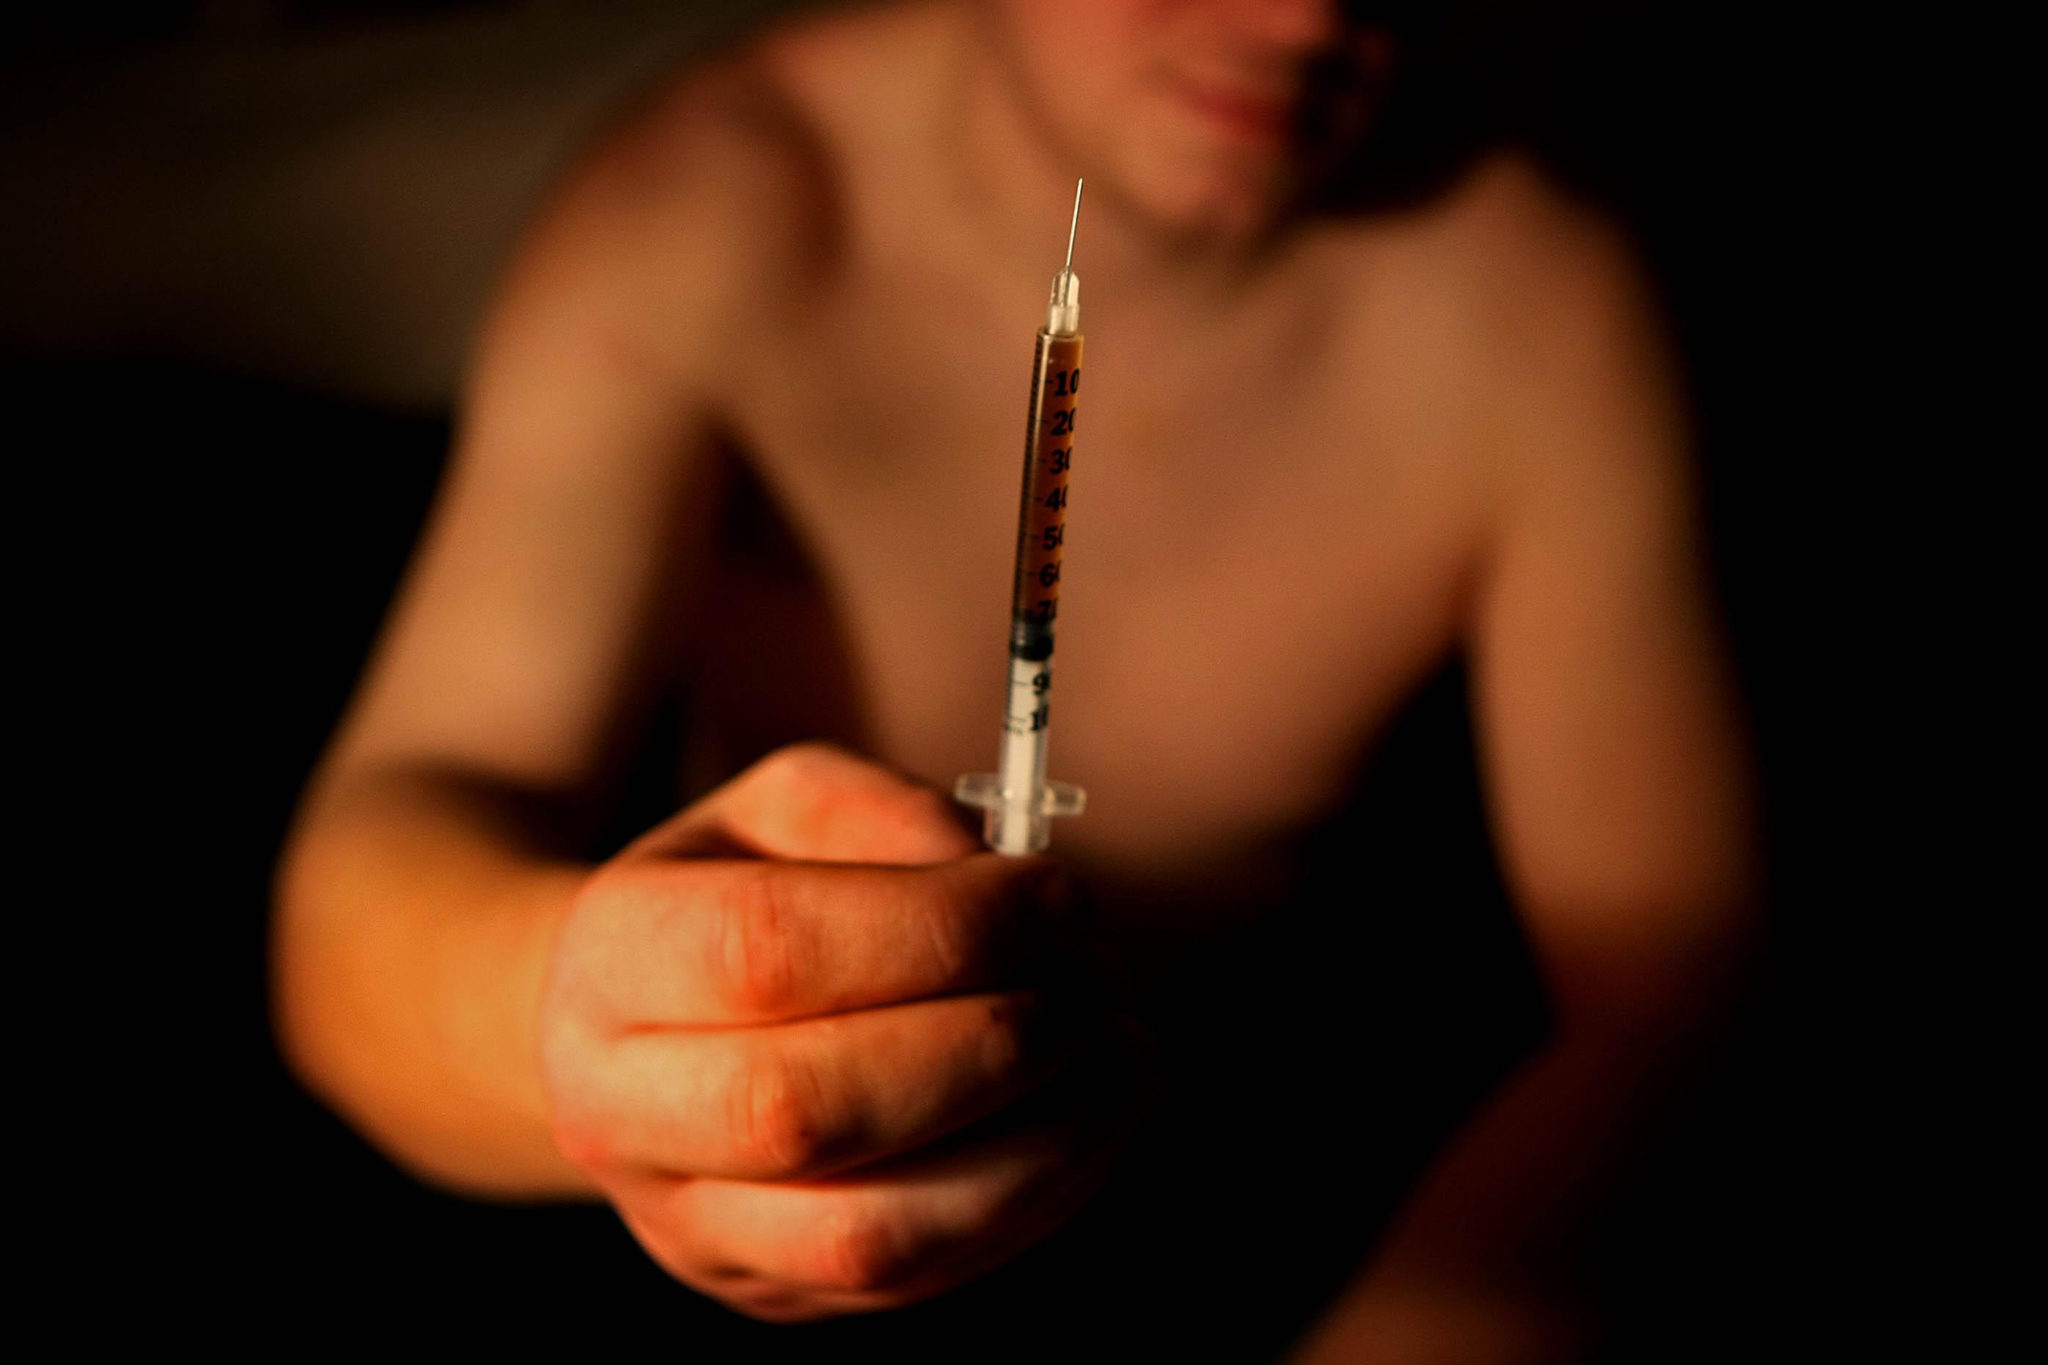 A man prepares to inject heroin in Portlaoise, Co Laois in this 2008 file photo.